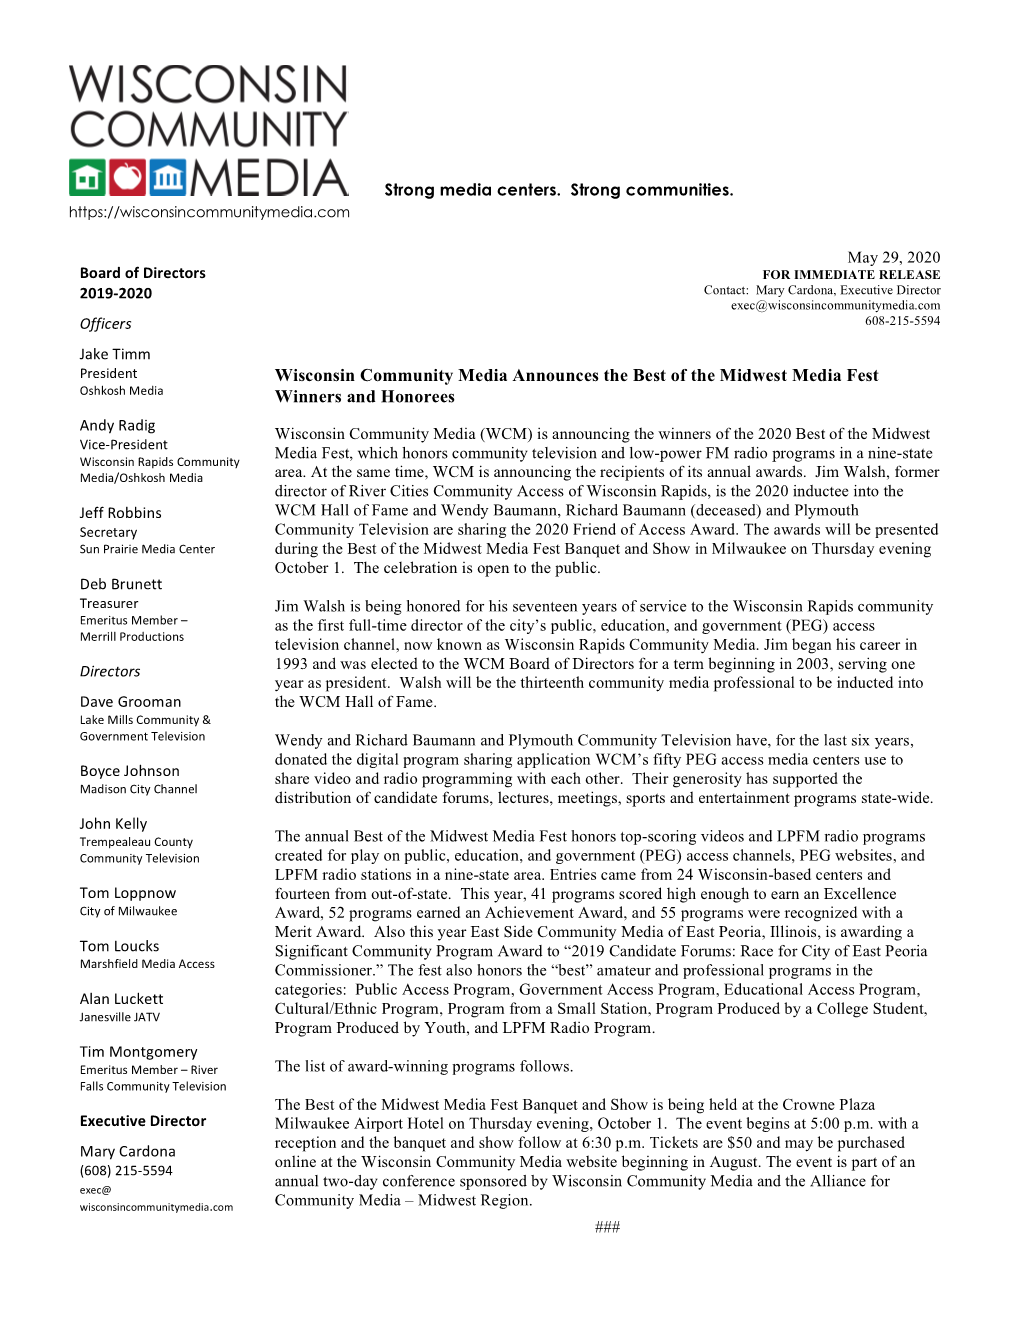 Wisconsin Community Media Announces the Best of the Midwest Media Fest Oshkosh Media Winners and Honorees